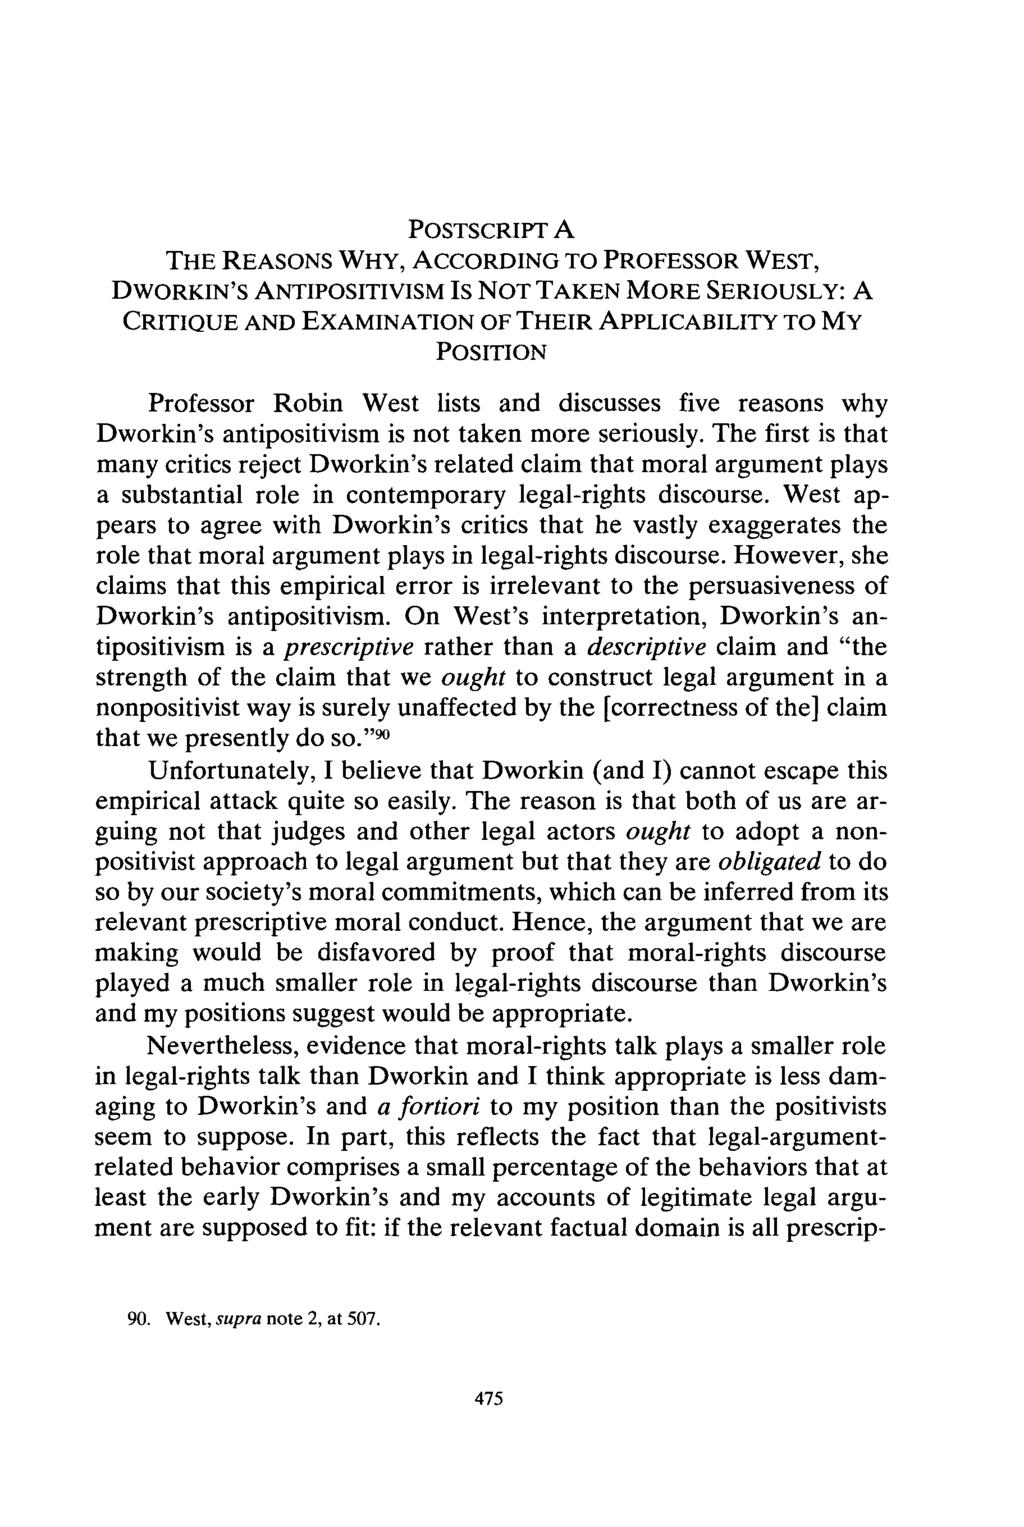 POSTSCRIPT A THE REASONS WHY, ACCORDING TO PROFESSOR WEST, DWORKIN'S ANTIPOSITIVISM IS NOT TAKEN MORE SERIOUSLY: A CRITIQUE AND EXAMINATION OF THEIR APPLICABILITY TO MY POSITION Professor Robin West